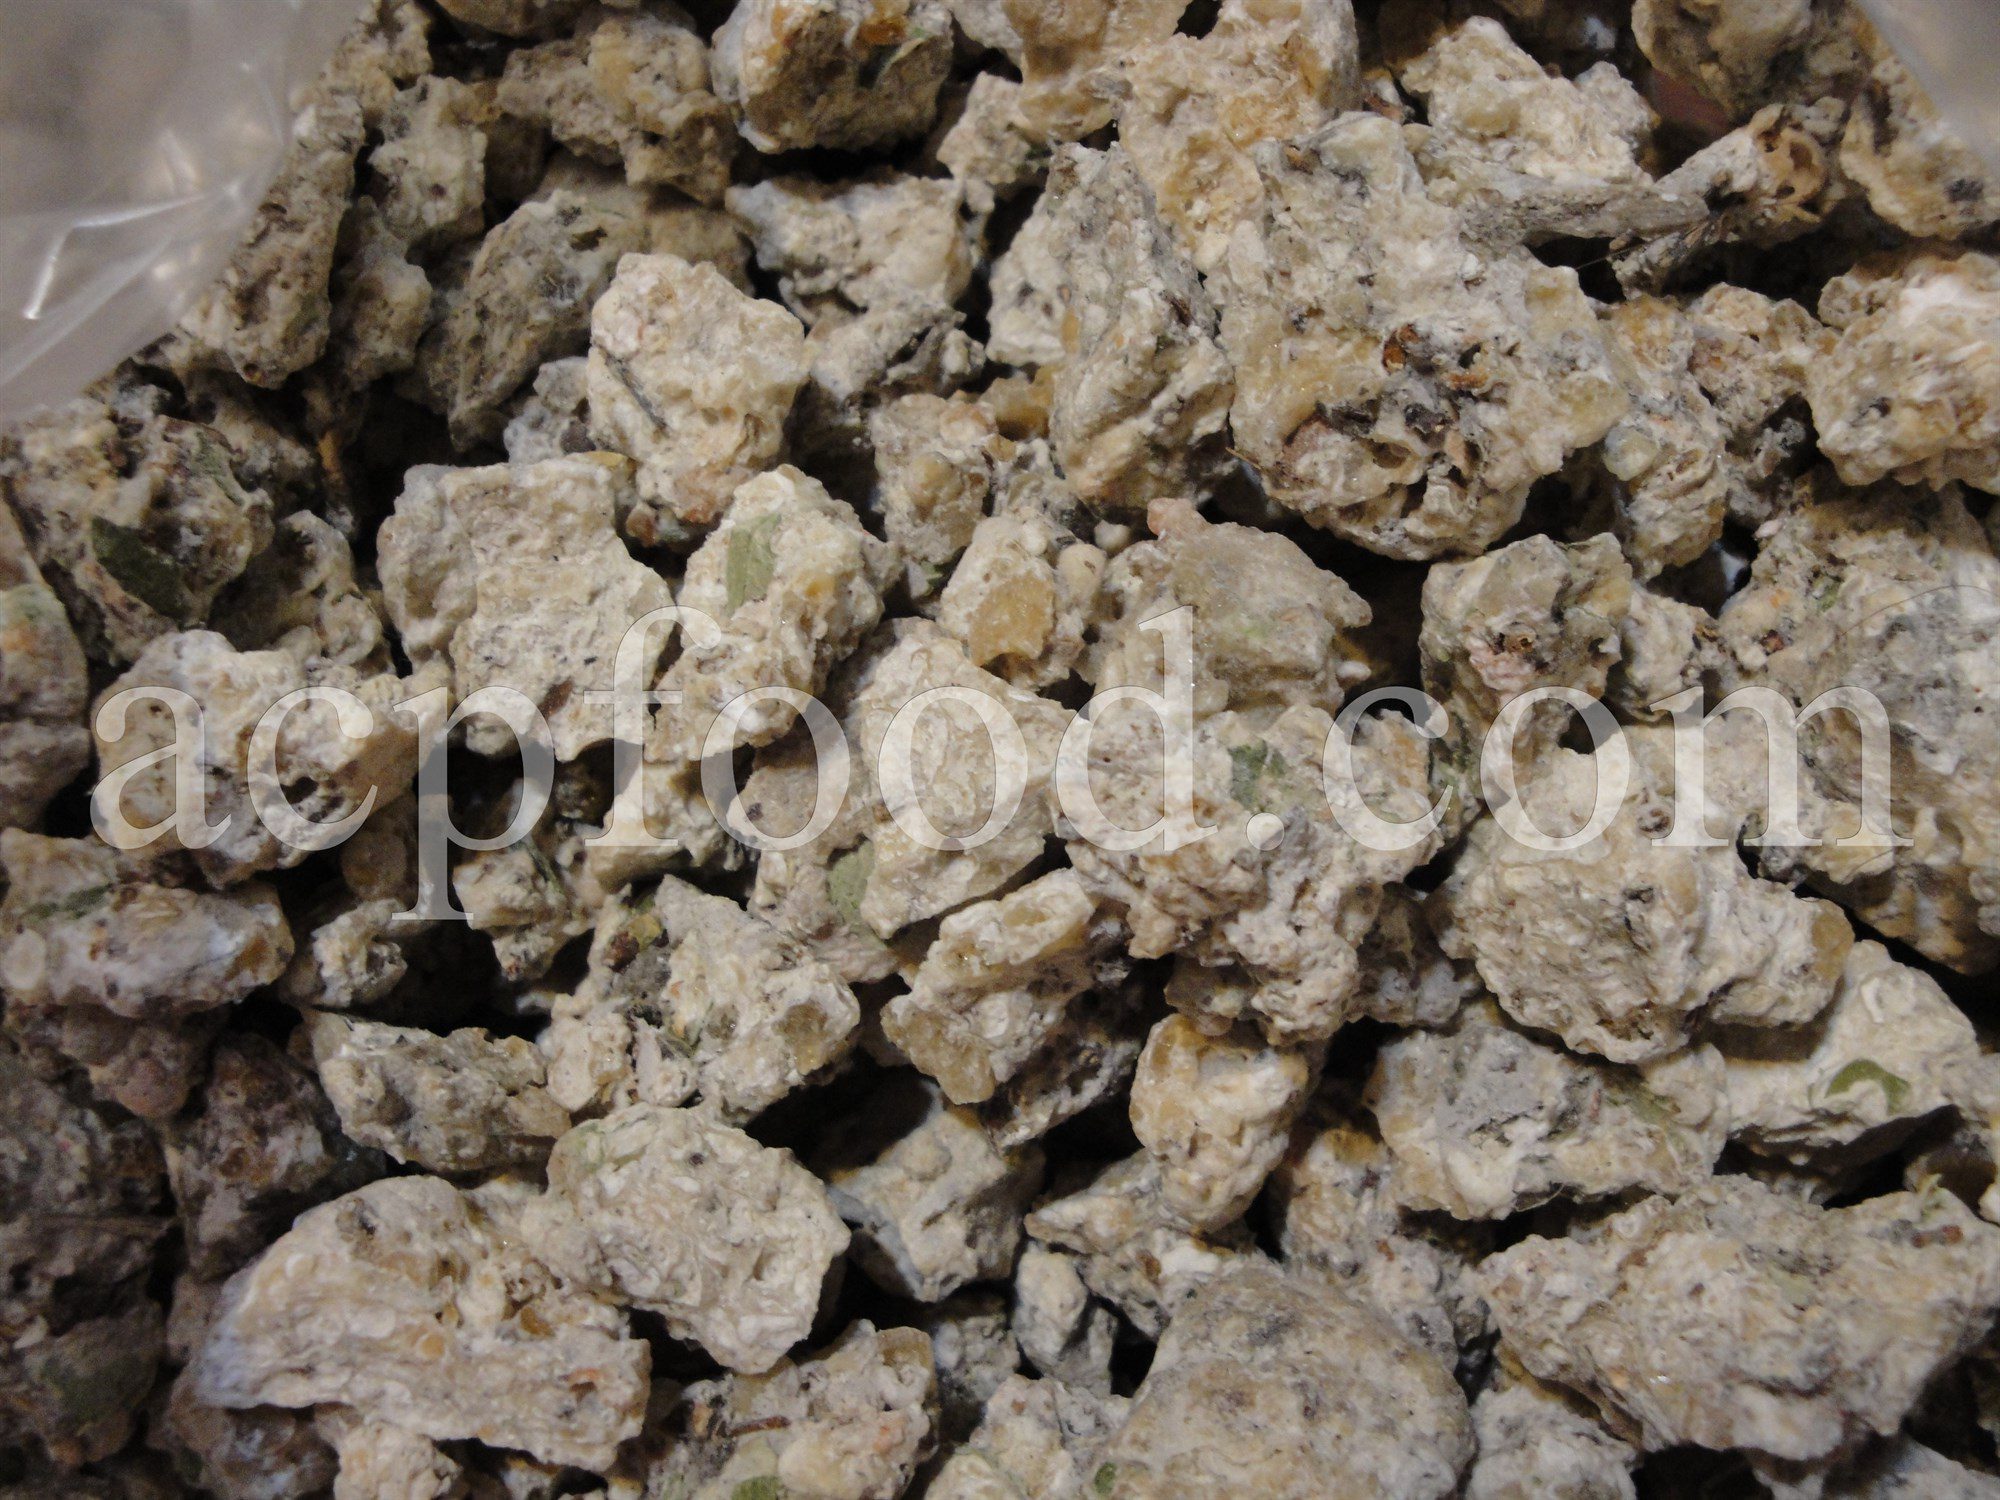 Bulk Purgative Manna for sale. Purgative Manna Wholesaler, Supplier, Exporter and Provider. Buy High Quality Purgative Manna with the Best Price.